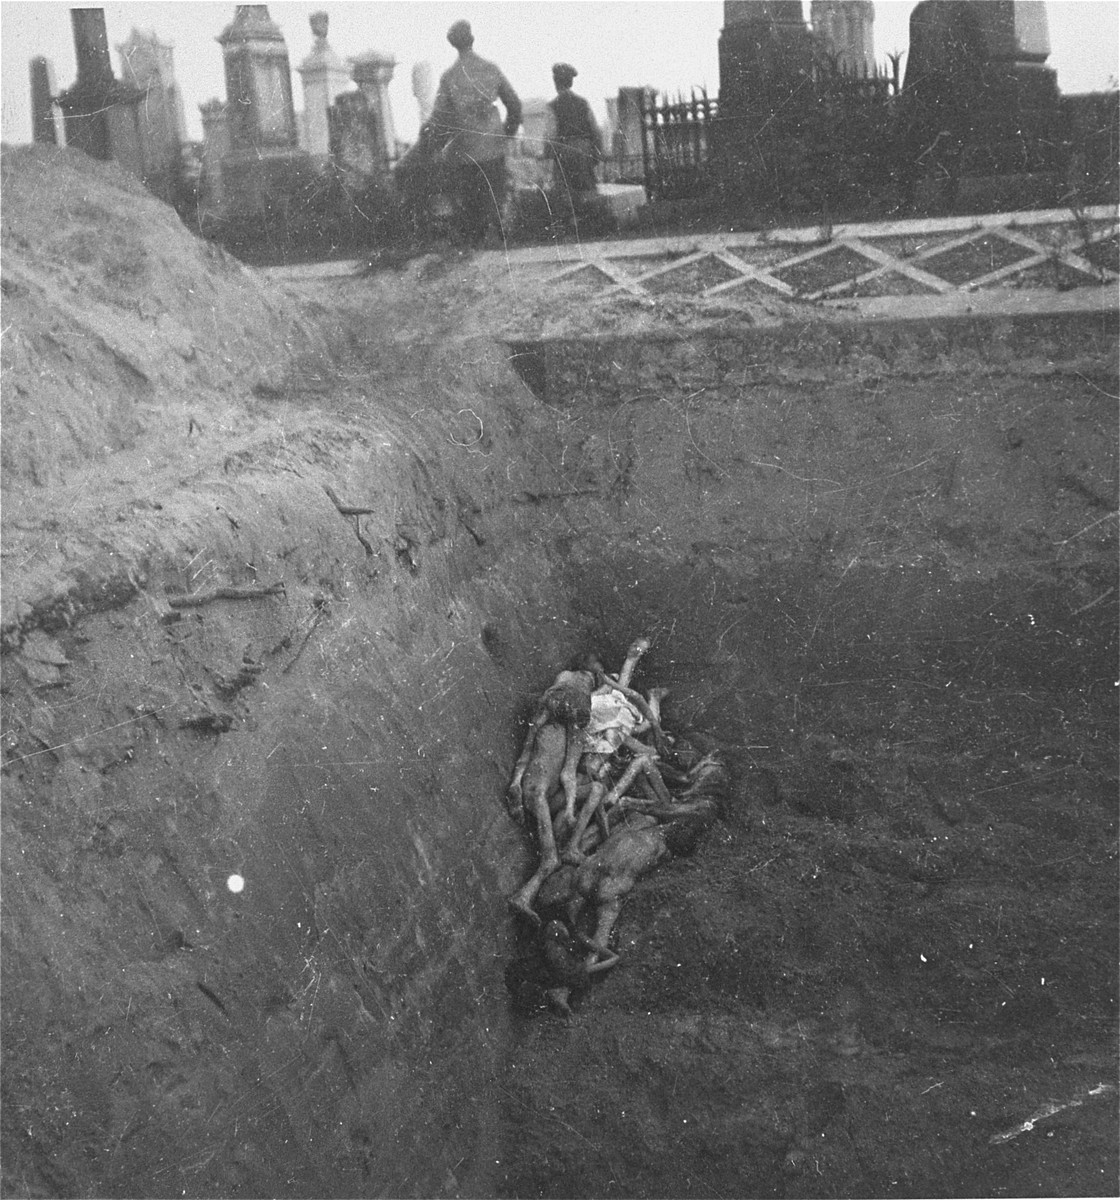 After unloading the grim contents of their cart, gravediggers in the Warsaw ghetto cemetery leave to collect more bodies for burial in a mass grave.  

Joest's caption reads: "As soon as the body-cart was empty, it went back again for more."